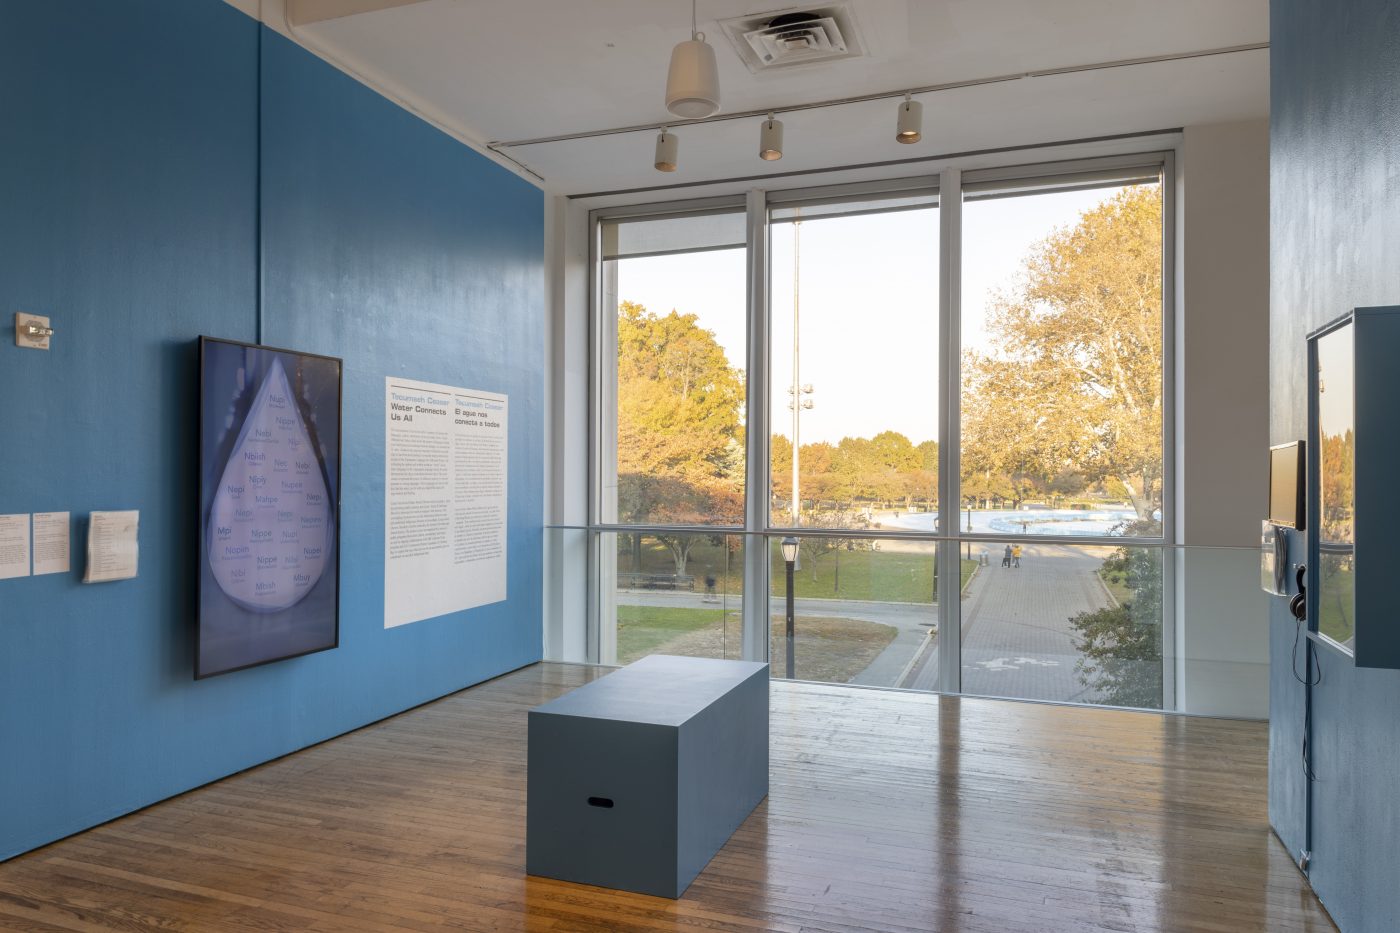 A bright room has two blue walls on opposite sides, and a large floor-to-ceiling window wall in between looking out on the green trees and gray pathways of Flushing Meadows Corona Park. A simple box/bench in between is painted the same blue as the walls. The left wall has a large monitor displaying a water droplet with text inside, and to the right of the monitor is a large wall text. The right wall has a glass vitrine, a small monitor, and smaller descriptive text.